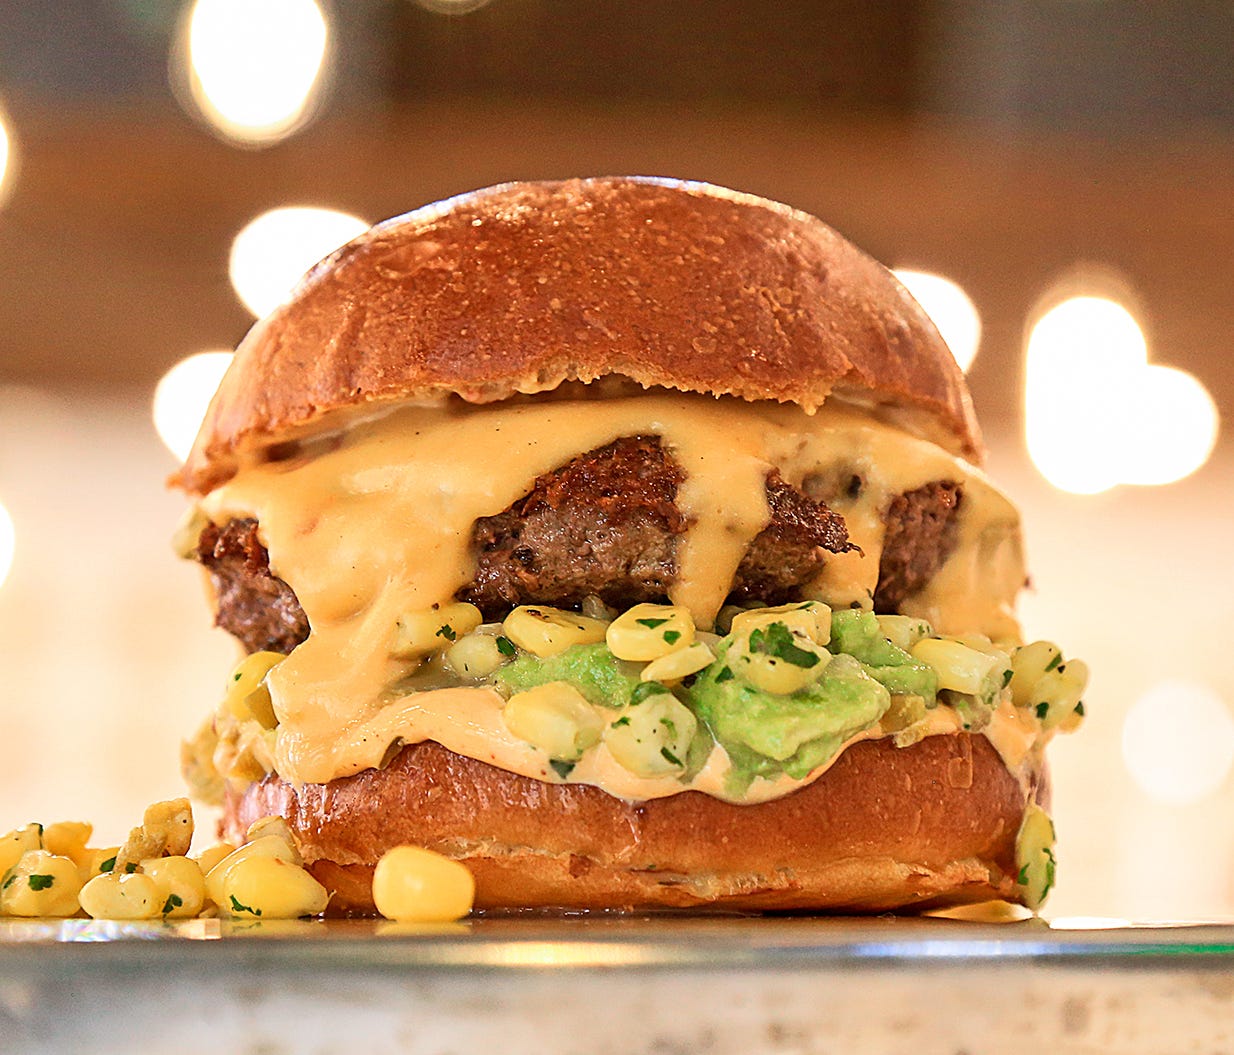 Michigan's Brome Modern Eatery has locations in Dearborn and Detroit, which offer organic, grass-fed beef burgers, plus fish, chicken, vegetable and plant-based options. Unique toppings include cherry pepper relish, corn salsa, ghost pepper jack chee